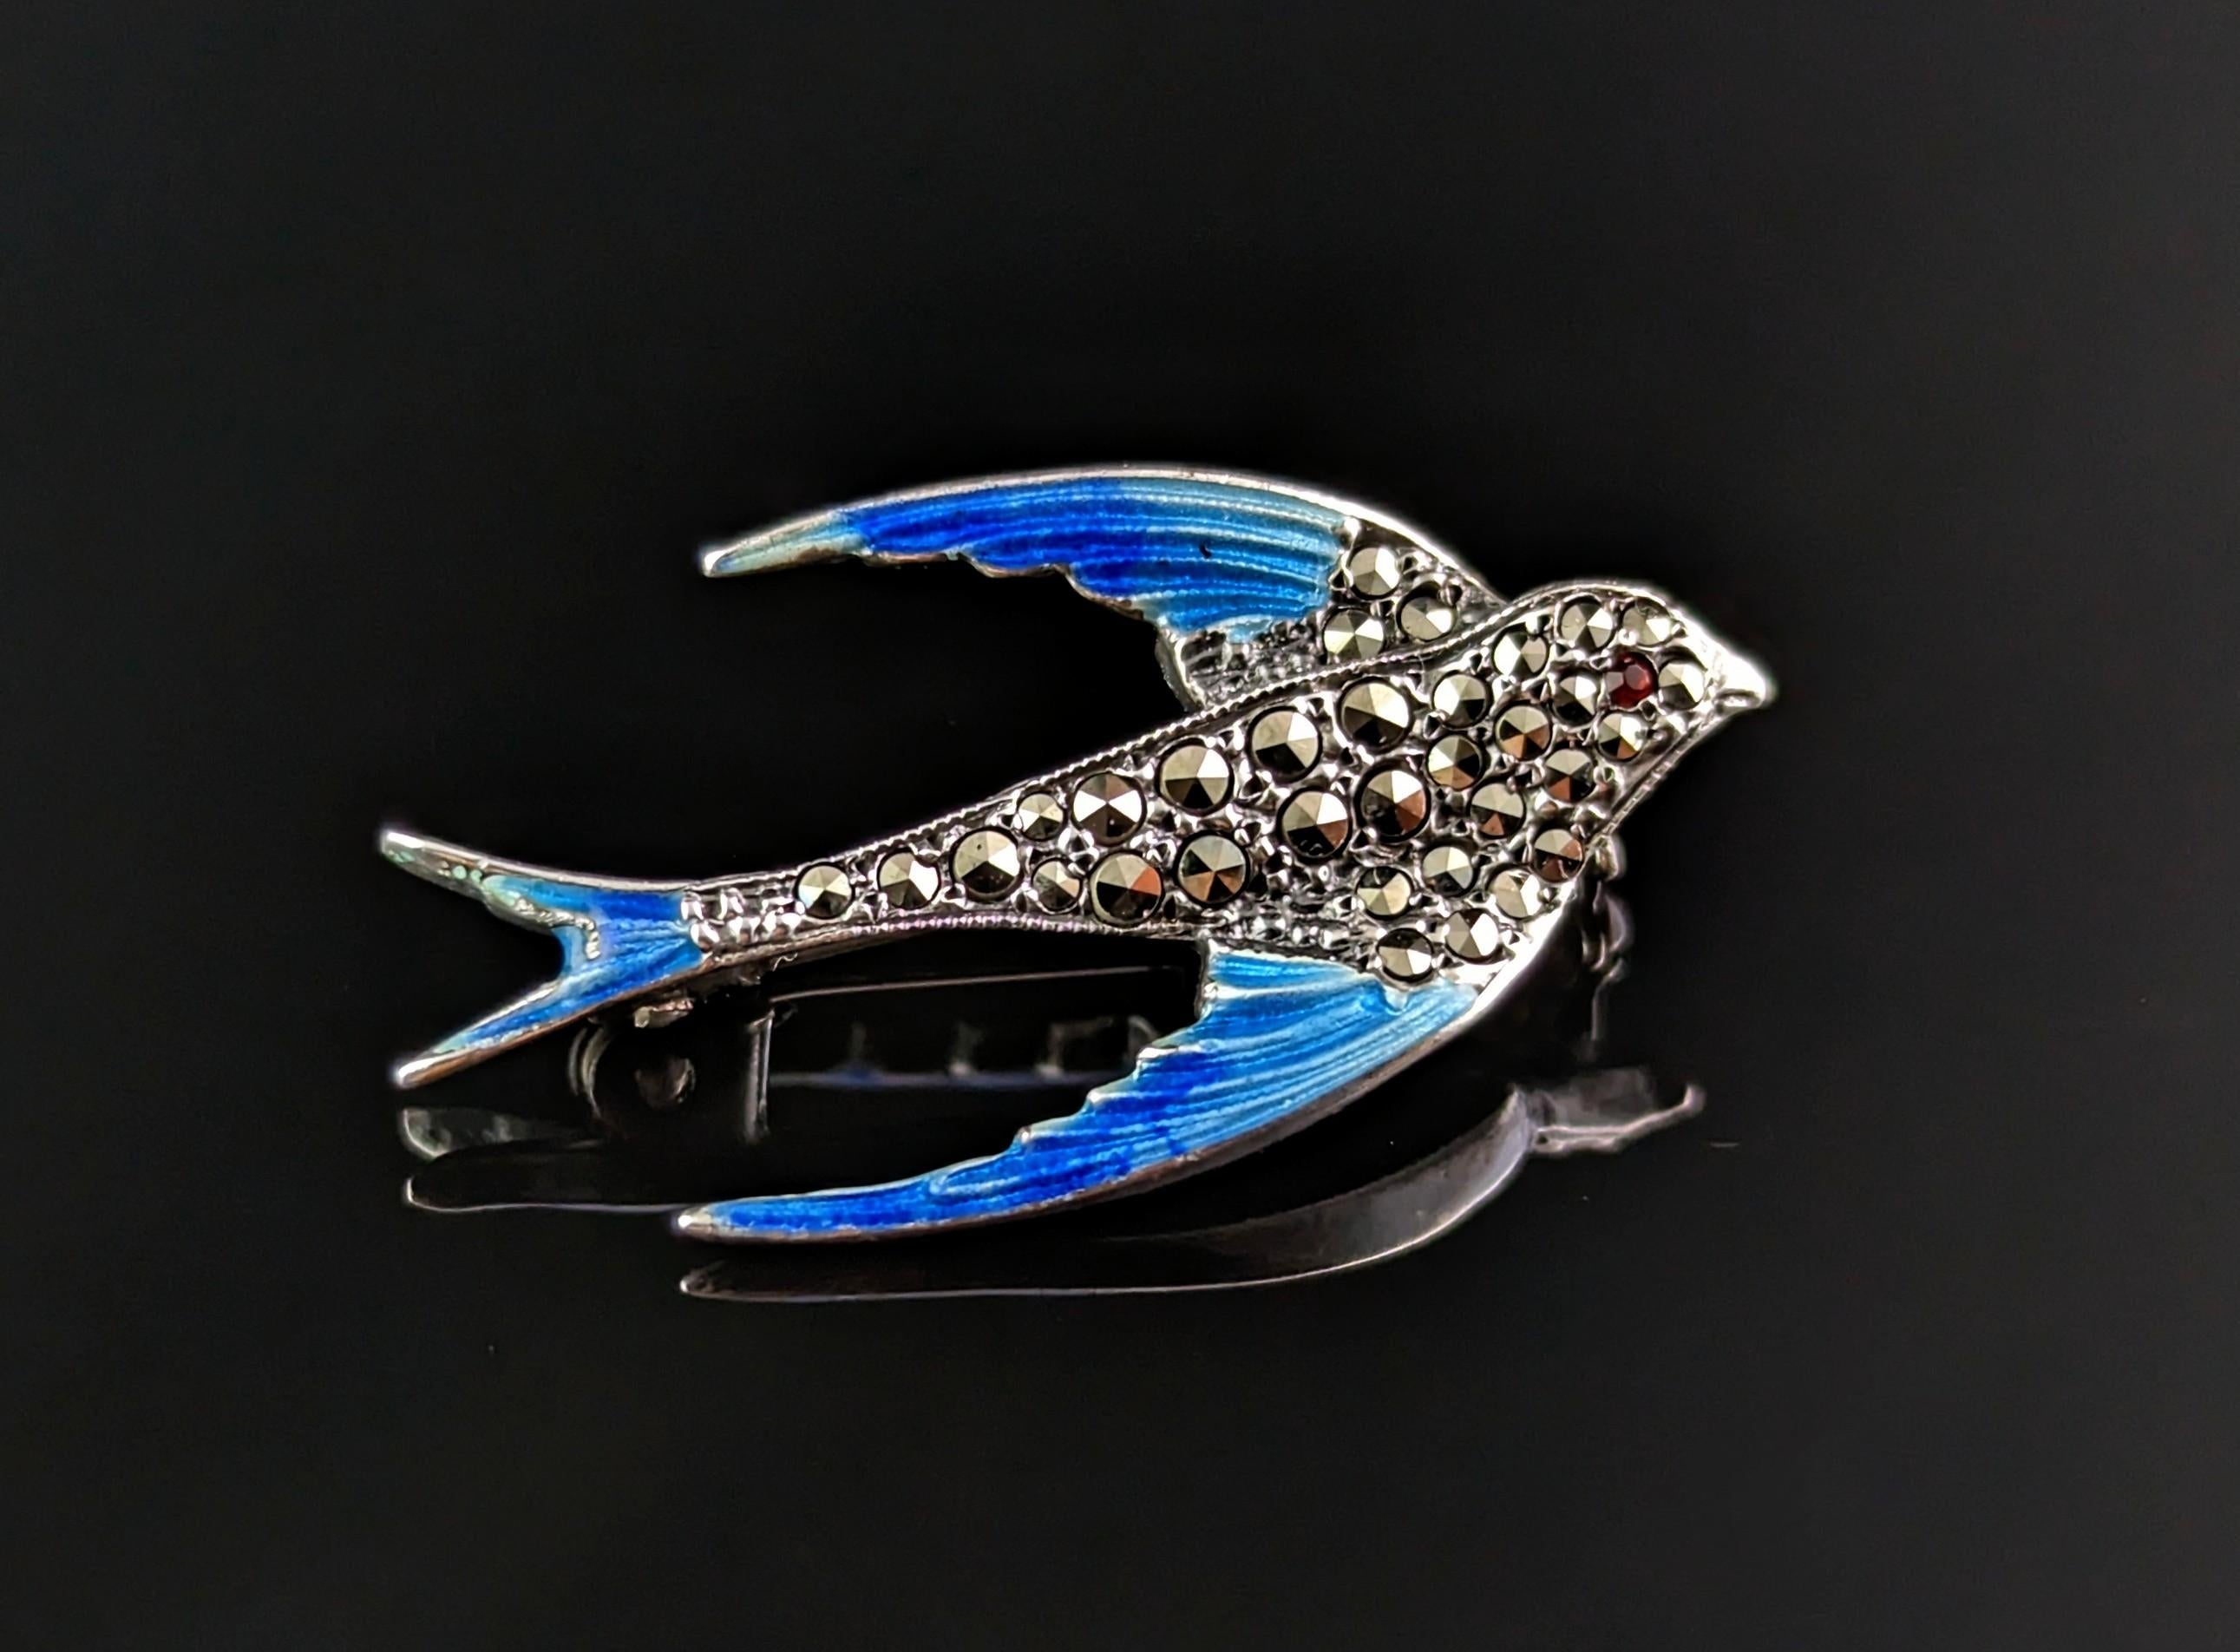 A charming vintage mid century era c1940s silver, Marcasite and enamel swallow brooch.

This is a small sized brooch well modelled as a swallow in 800 silver, adorned with marcasite and decorated in beautiful blue enamel.

The bird has a tiny red